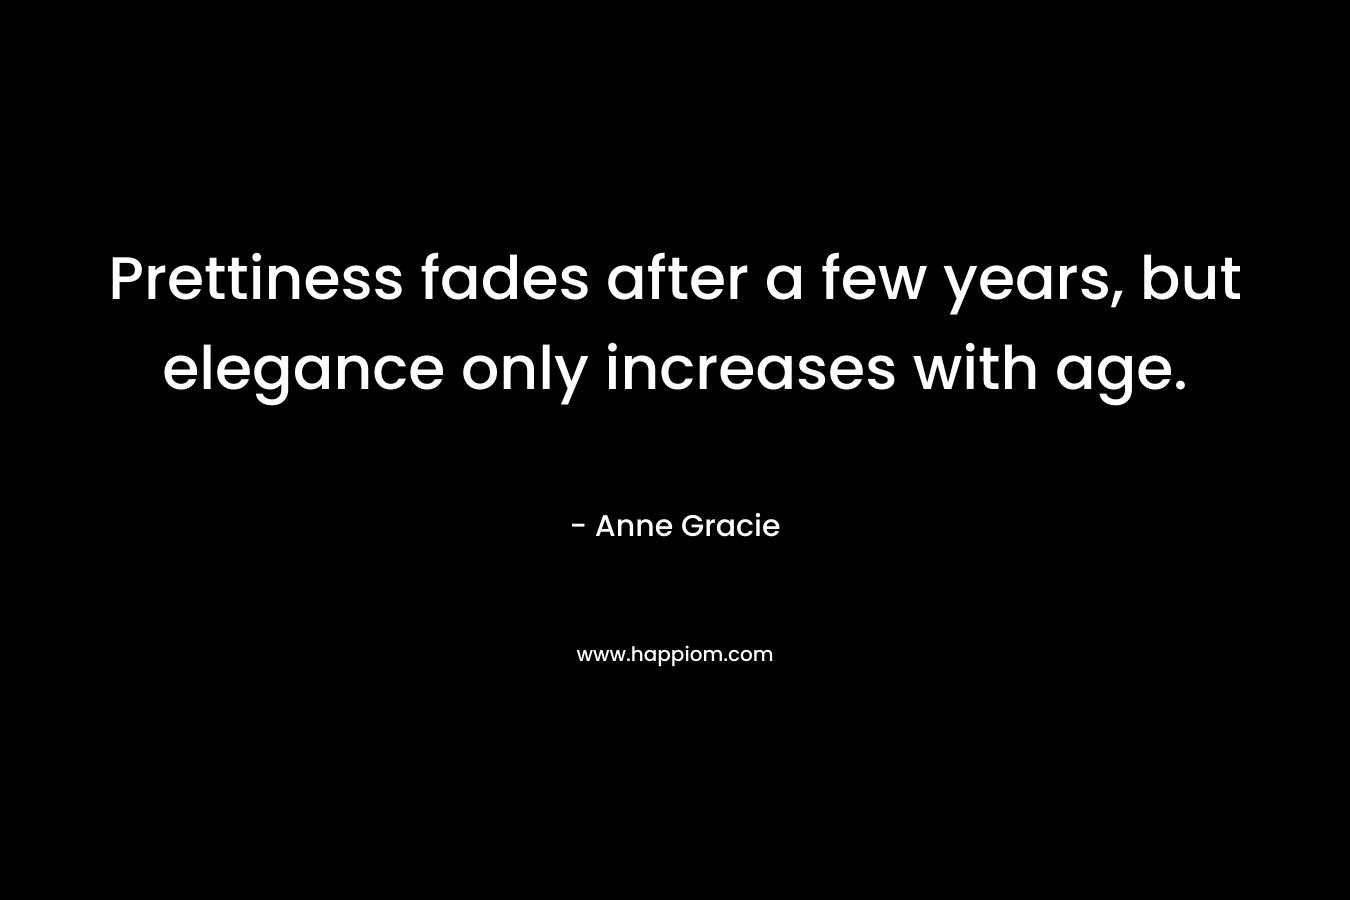 Prettiness fades after a few years, but elegance only increases with age. – Anne Gracie